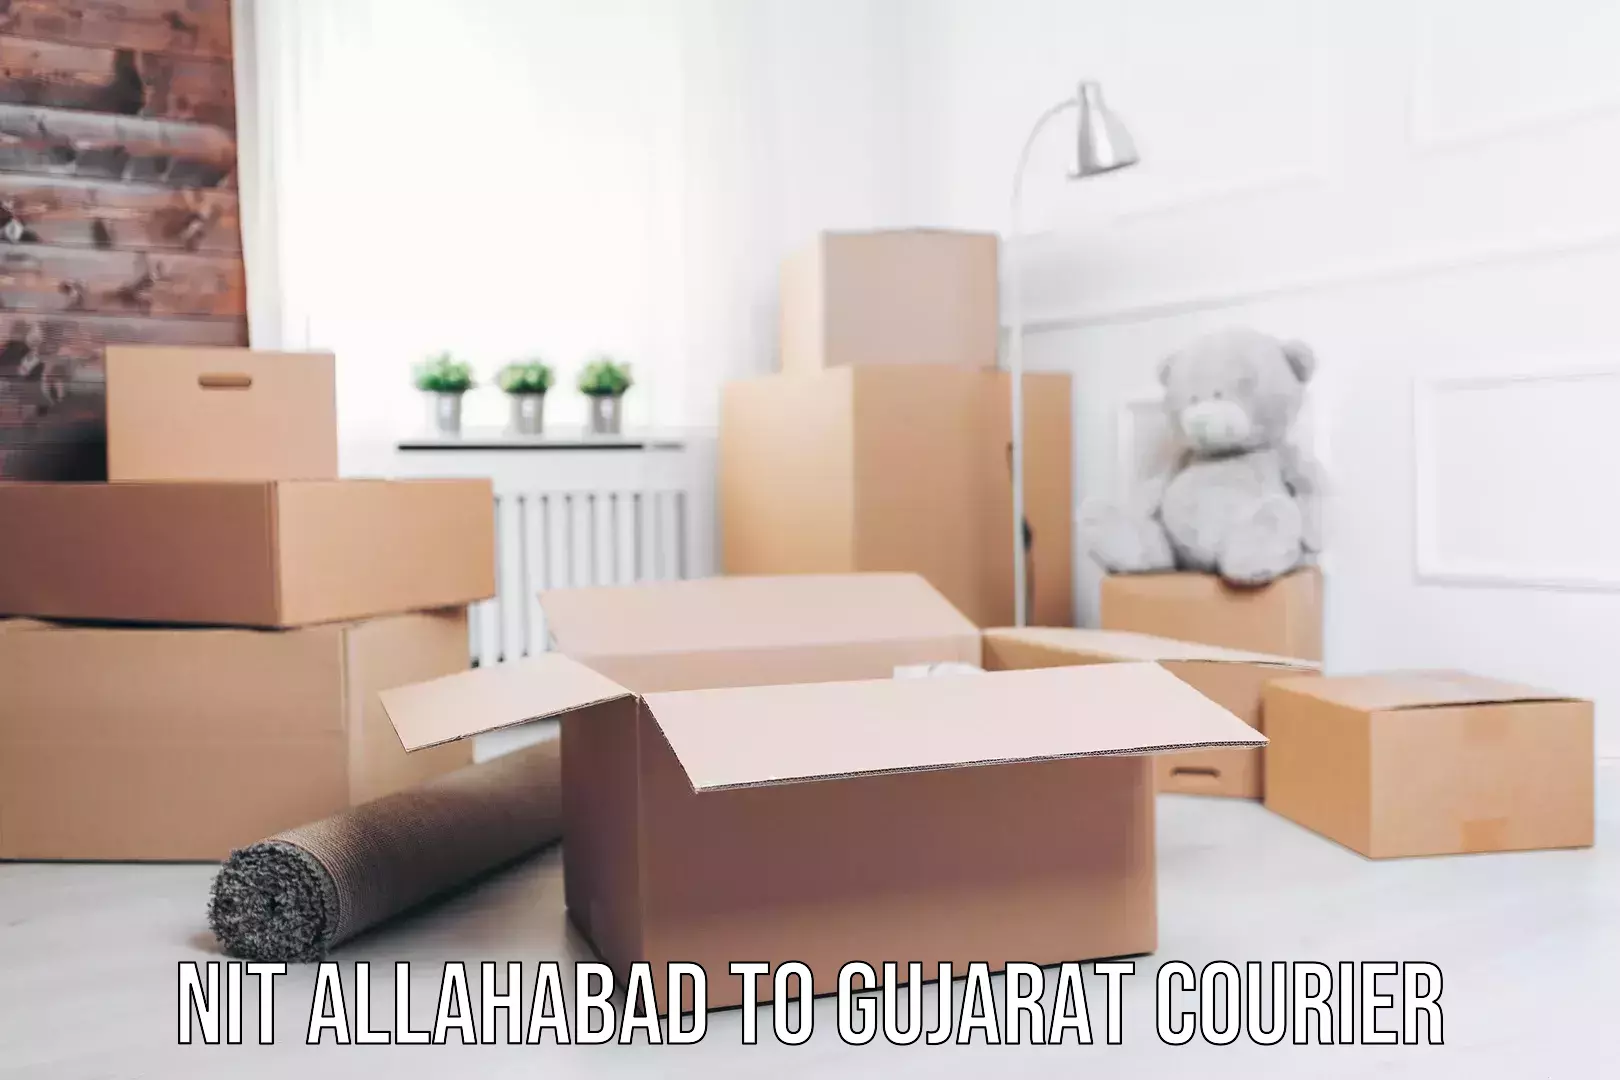 Professional furniture movers in NIT Allahabad to Gujarat